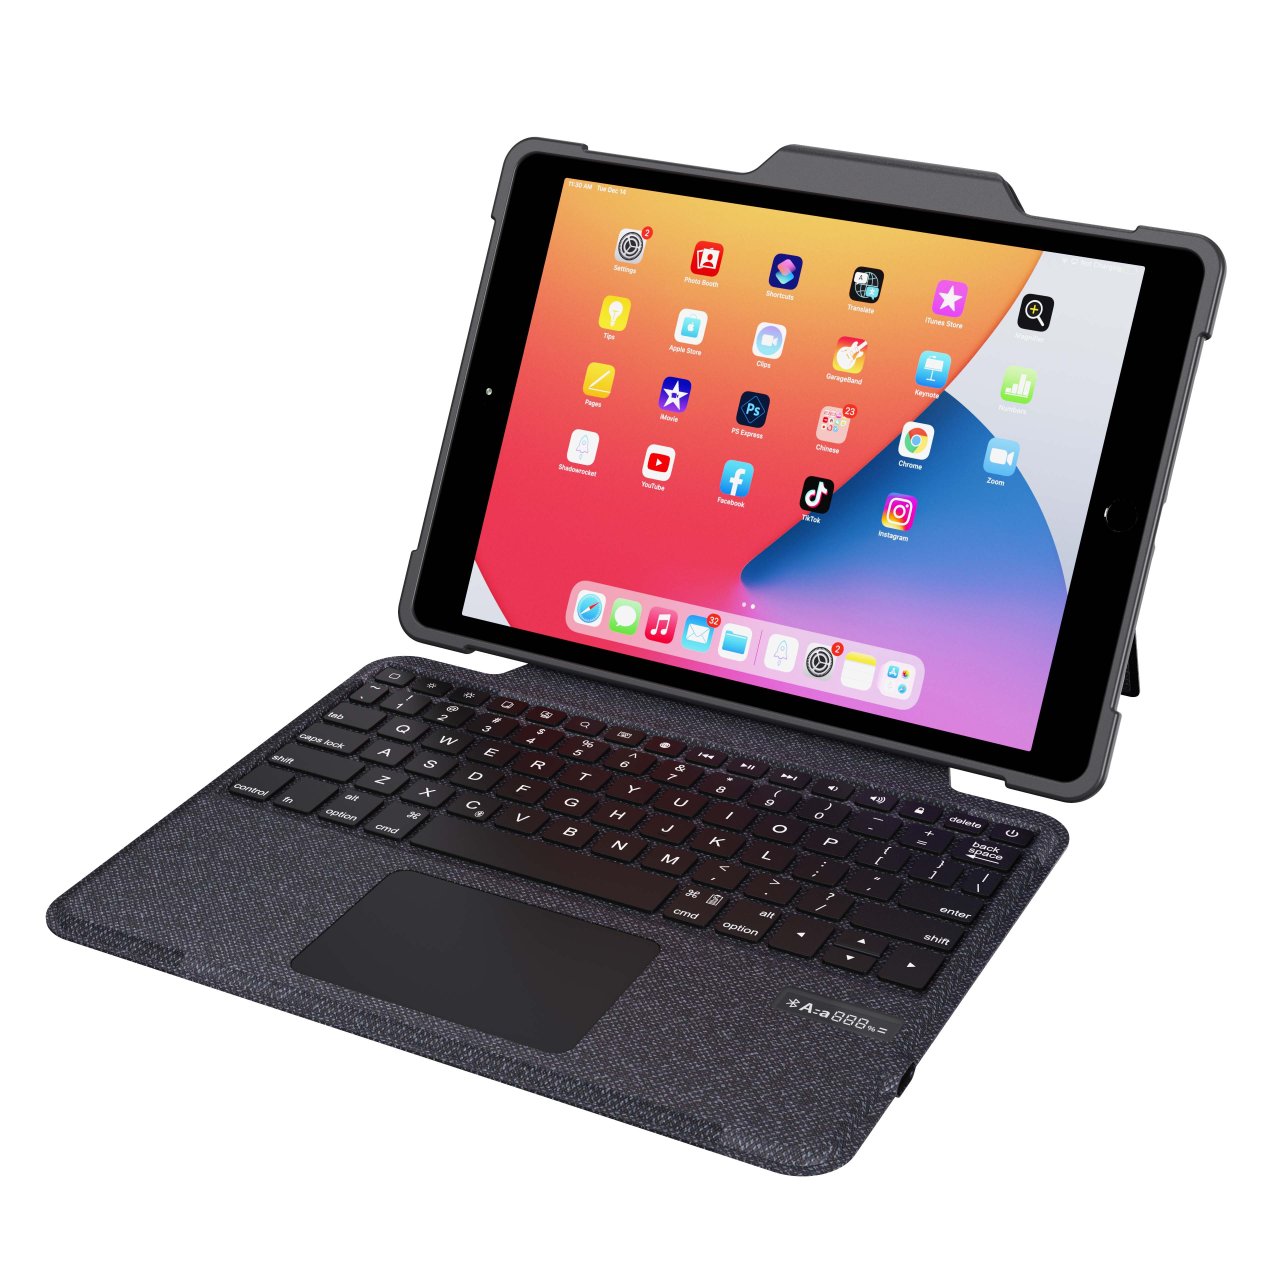 DEQSTER Rugged Touch Keyboard 10.2"